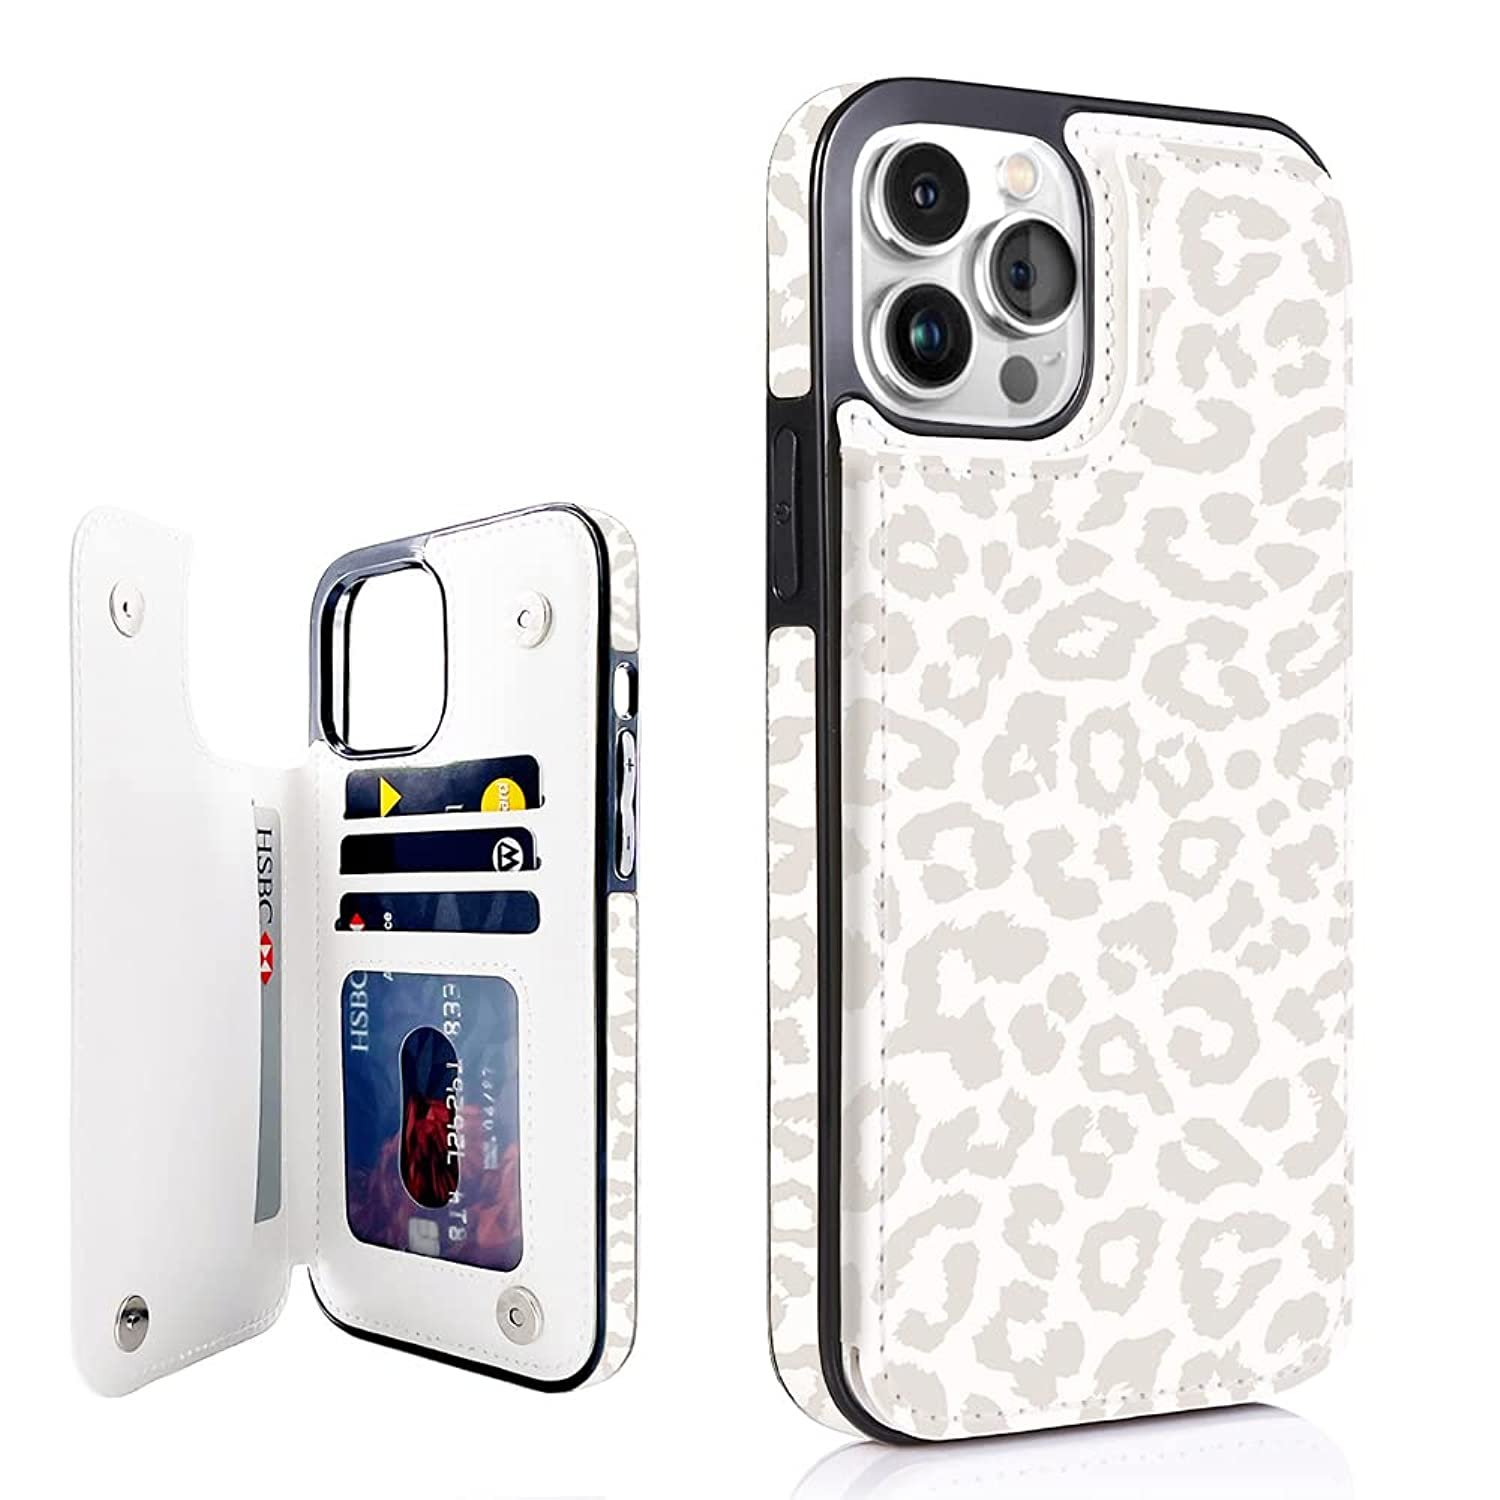 Beige Leopard Design Compatible With Iphone 13 Pro Max 6.7"" Wallet Case With Credit Card 